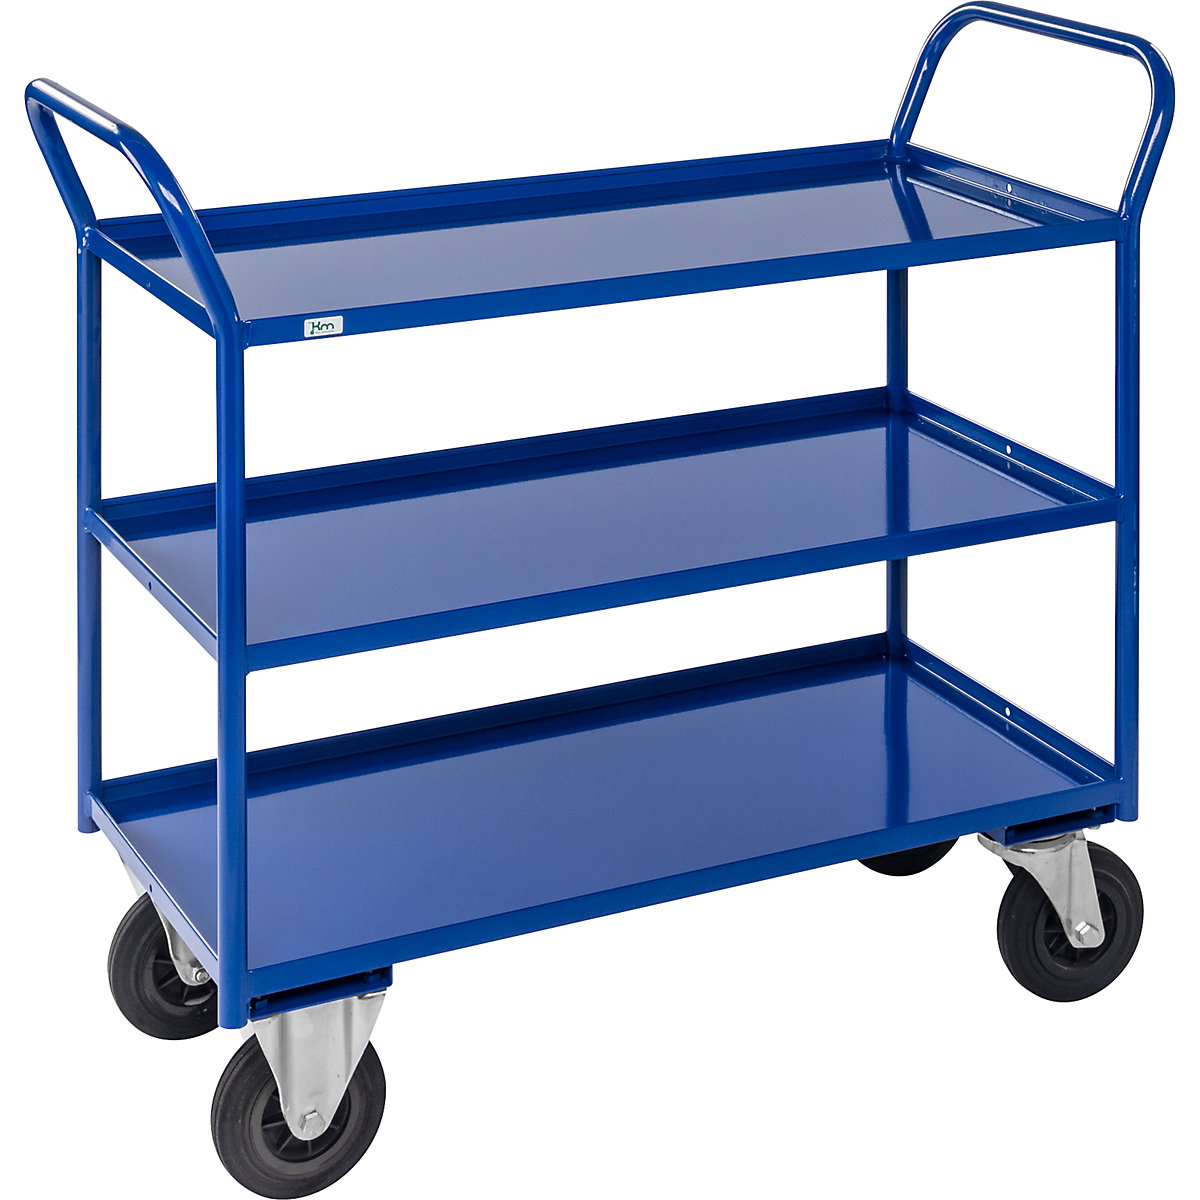 KM41 table trolley – Kongamek, 3 shelves with raised edges, LxWxH 1080 x 450 x 1000 mm, blue, 2 swivel castors with stops, 2 fixed castors, 5+ items-3